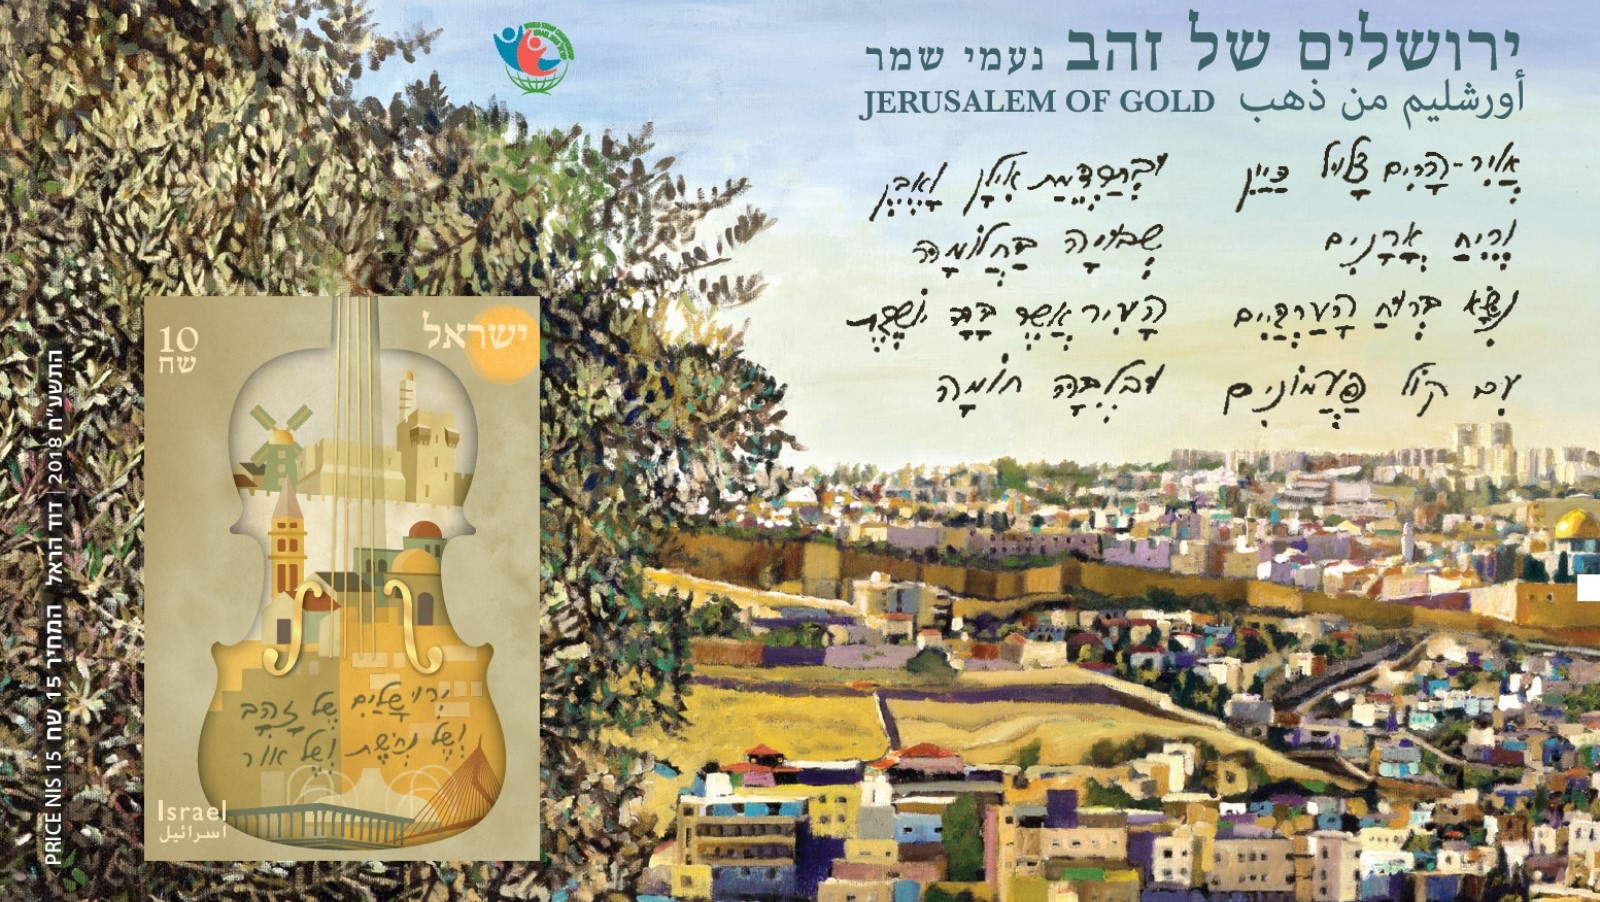 At the 2018 World Stamp Championship, the Israel Philatelic Service will issue 3,000 copies of a special imperforated souvenir sheet depicting "Jerusalem of Gold" with a printed gold foil as a gift to exhibition catalog purchasers. Photo: courtesy